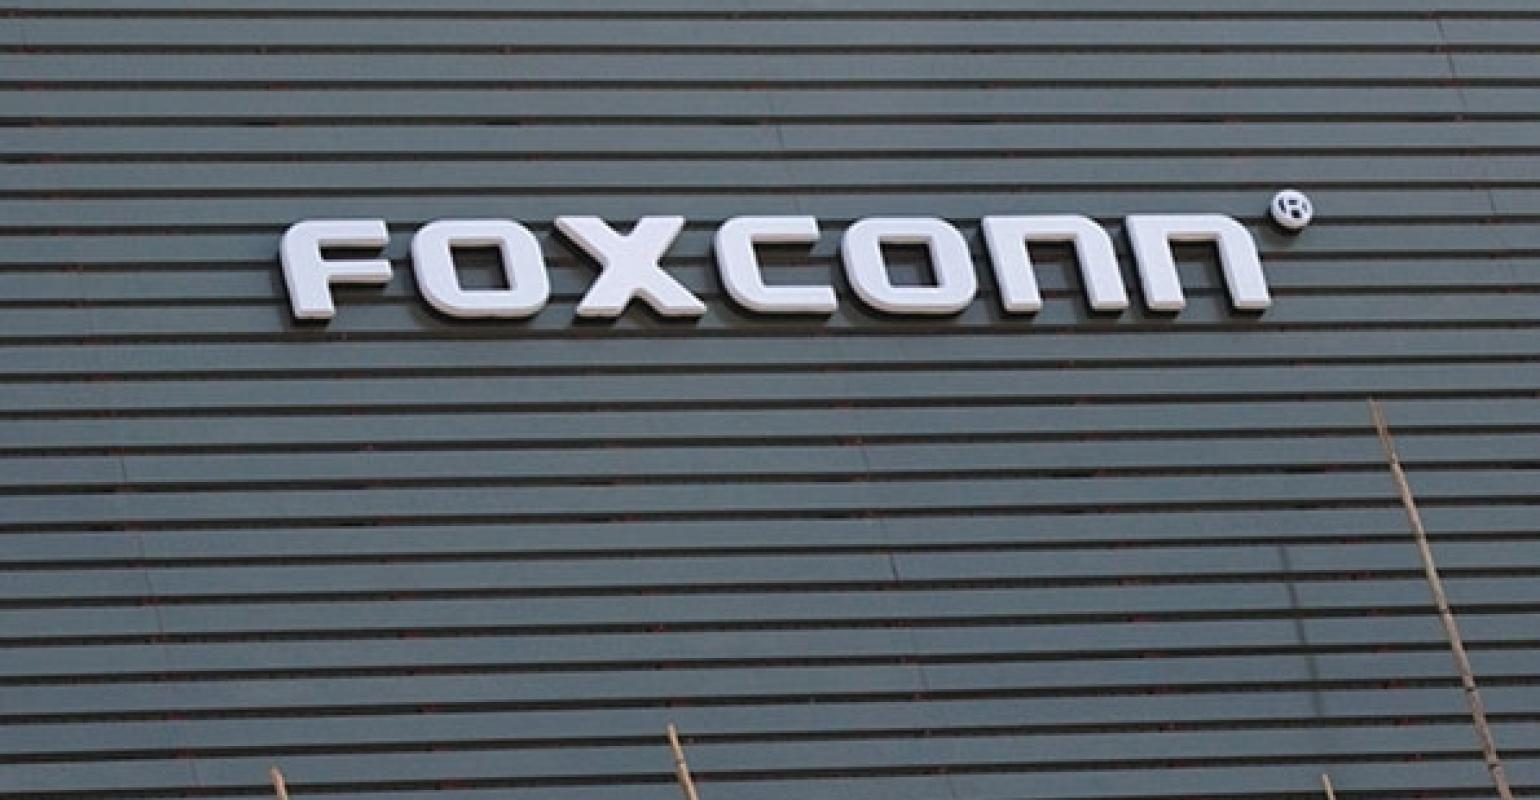 Foxconn Logo - Foxconn Manager Steals Apple iPhonesin China. Intellectual Property